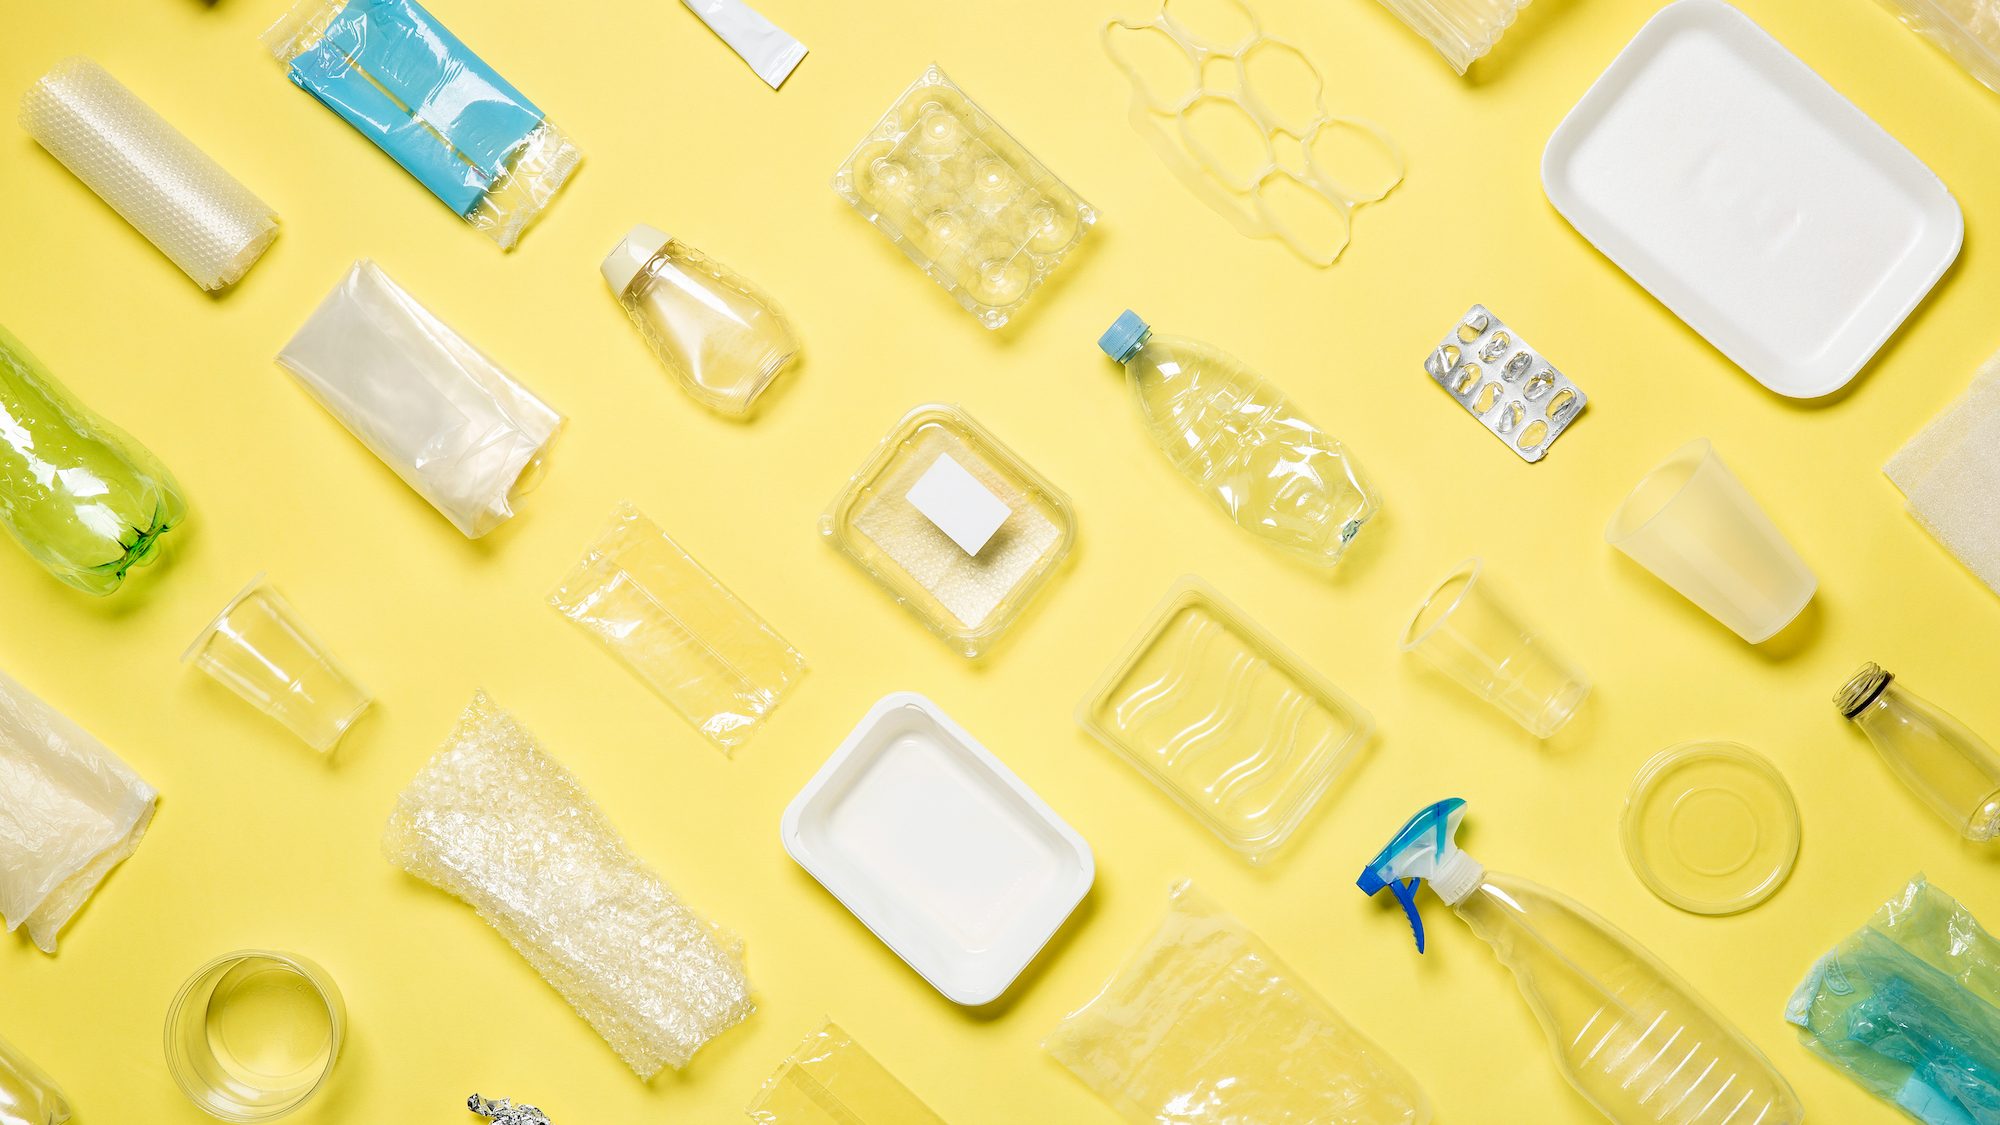 Different,Types,Of,Used,Plastic,Packaging,Arranged,On,A,Yellow